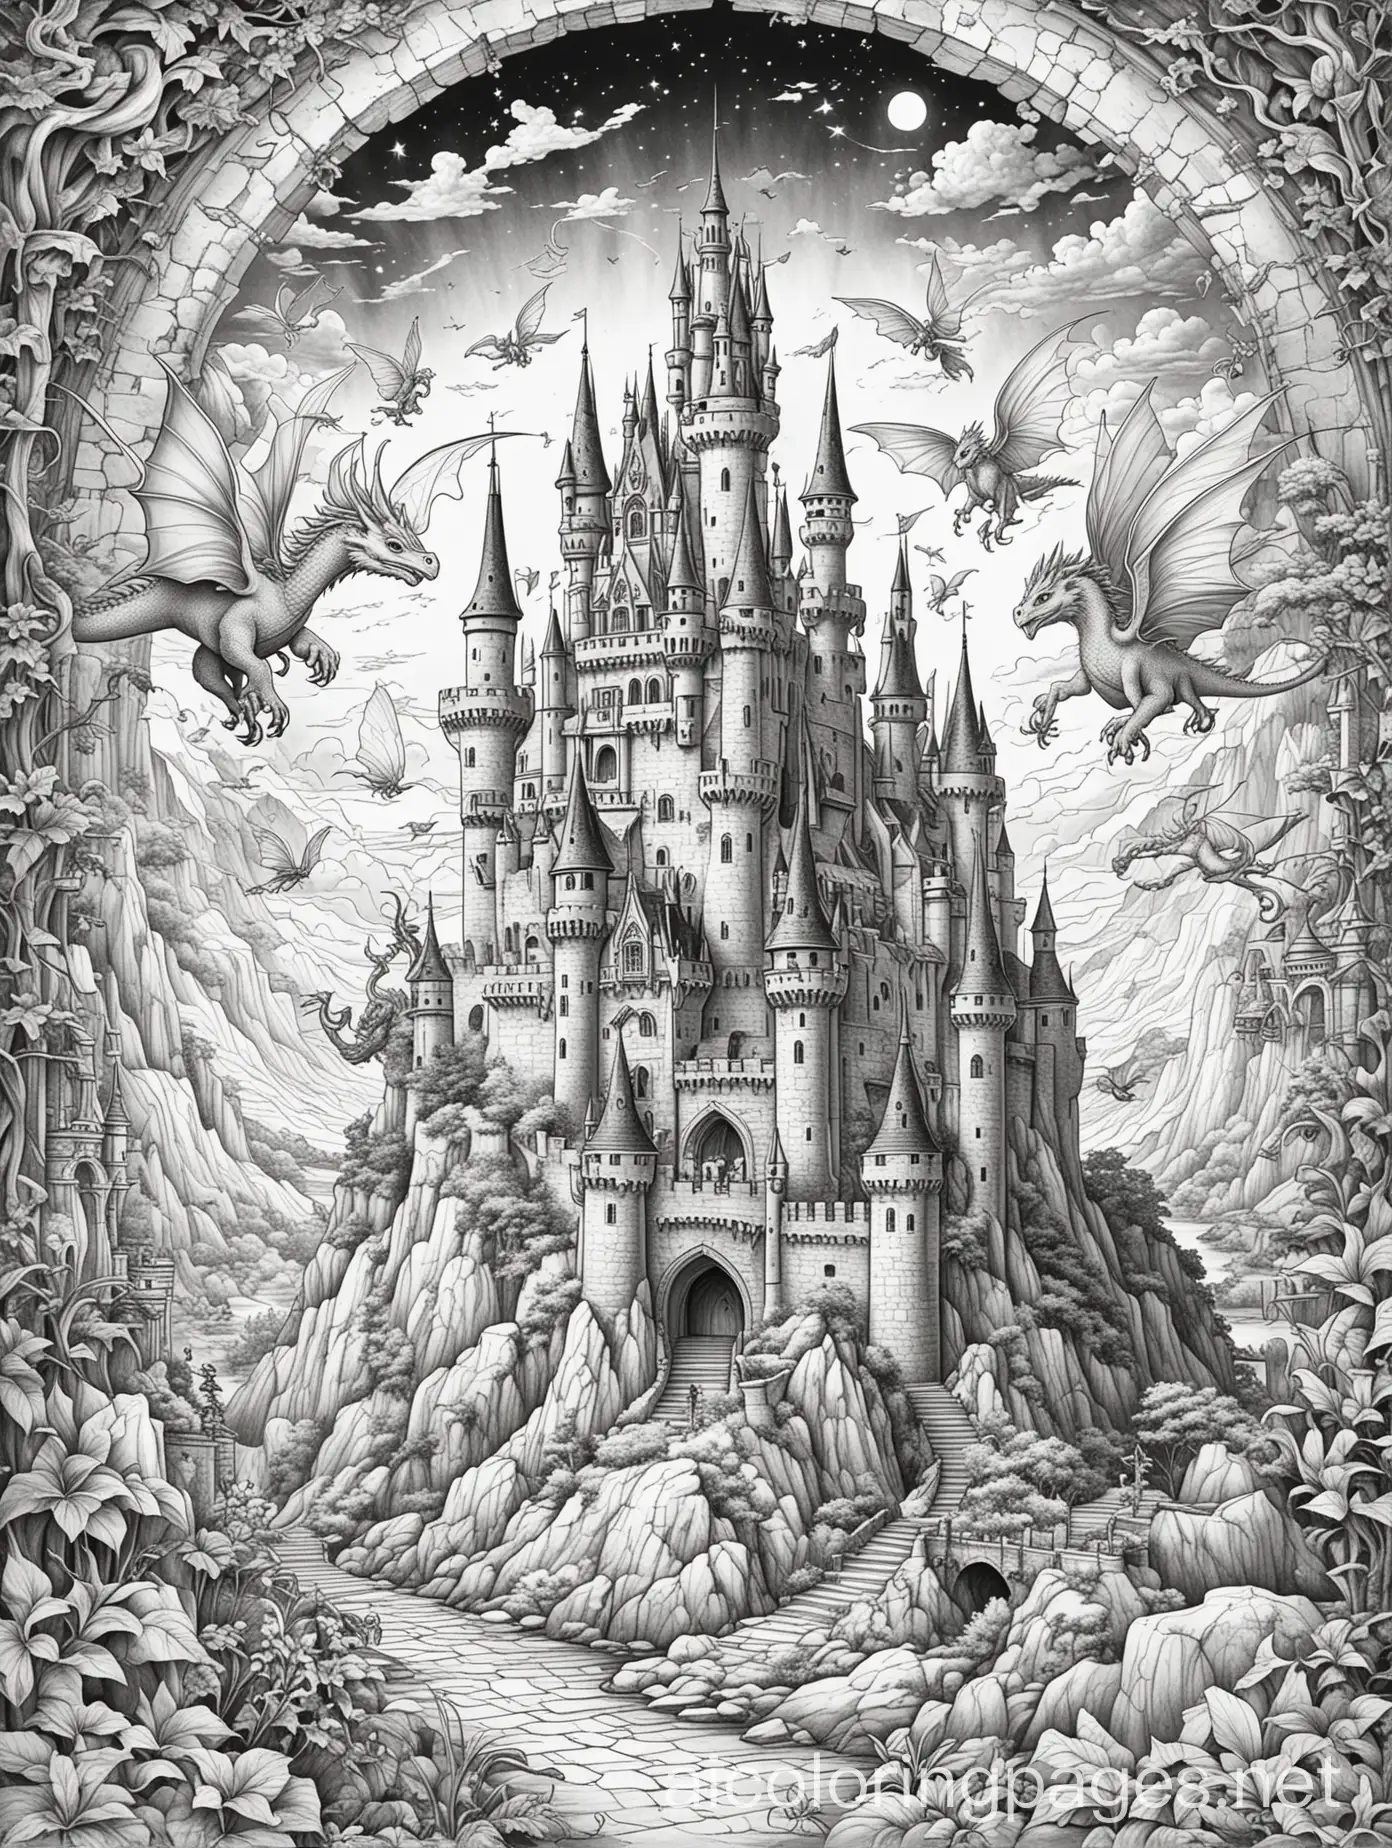 massive castle with a dragon in the sky and fairies around and mystical creatures, Coloring Page, black and white, line art, white background, Simplicity, Ample White Space. The background of the coloring page is plain white to make it easy for young children to color within the lines. The outlines of all the subjects are easy to distinguish, making it simple for kids to color without too much difficulty